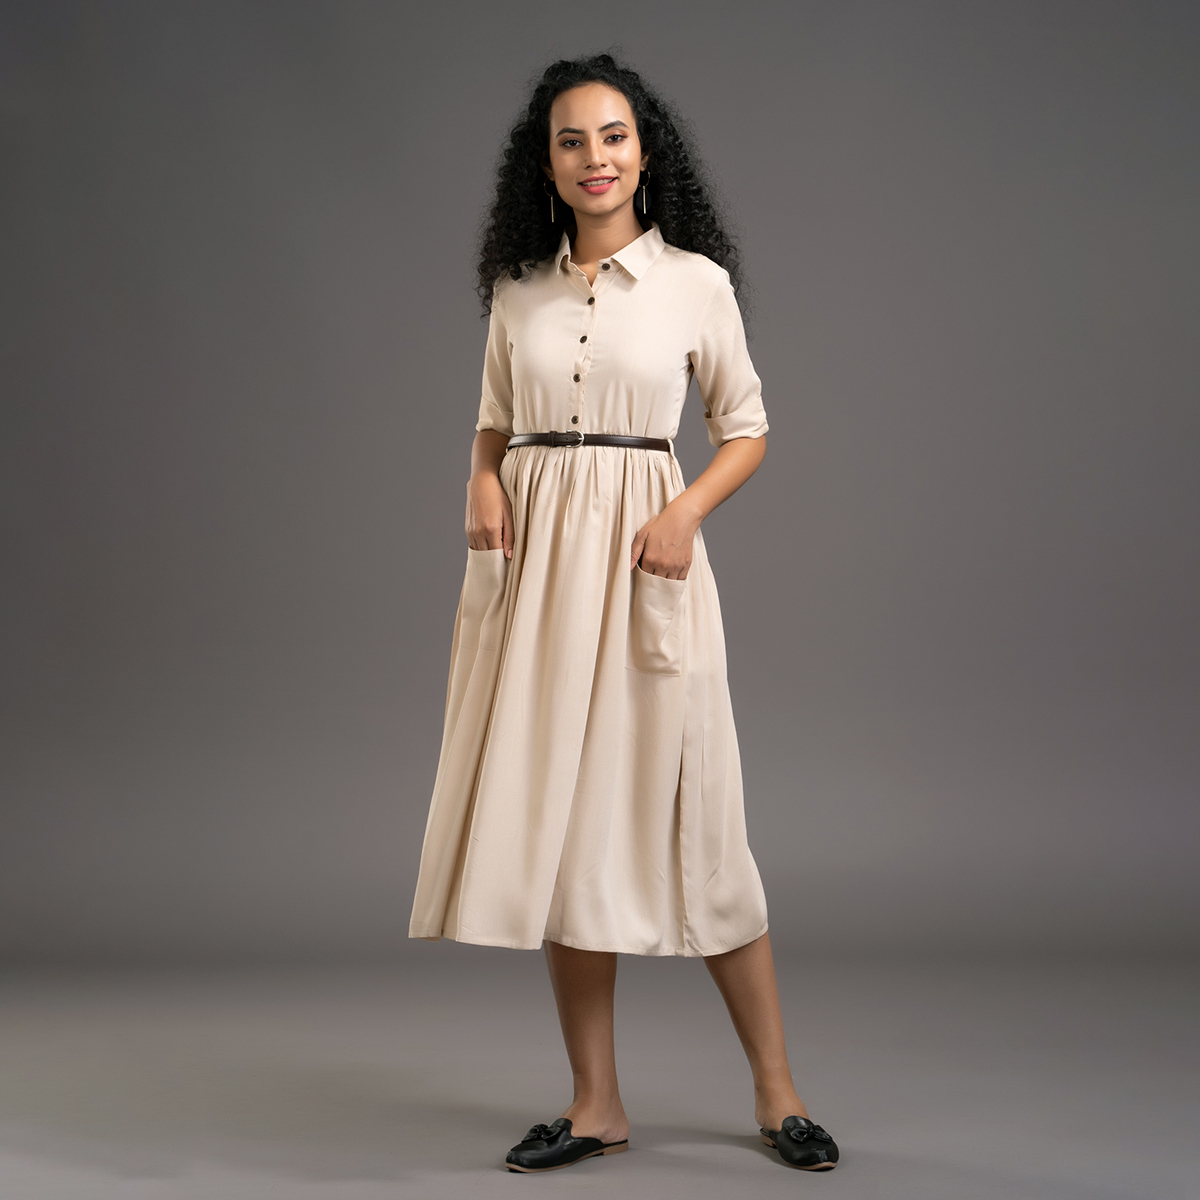 Zella Solid Color Shirt Midi Dress styled with Patch Pockets & Waist belt - Lt.Chikoo